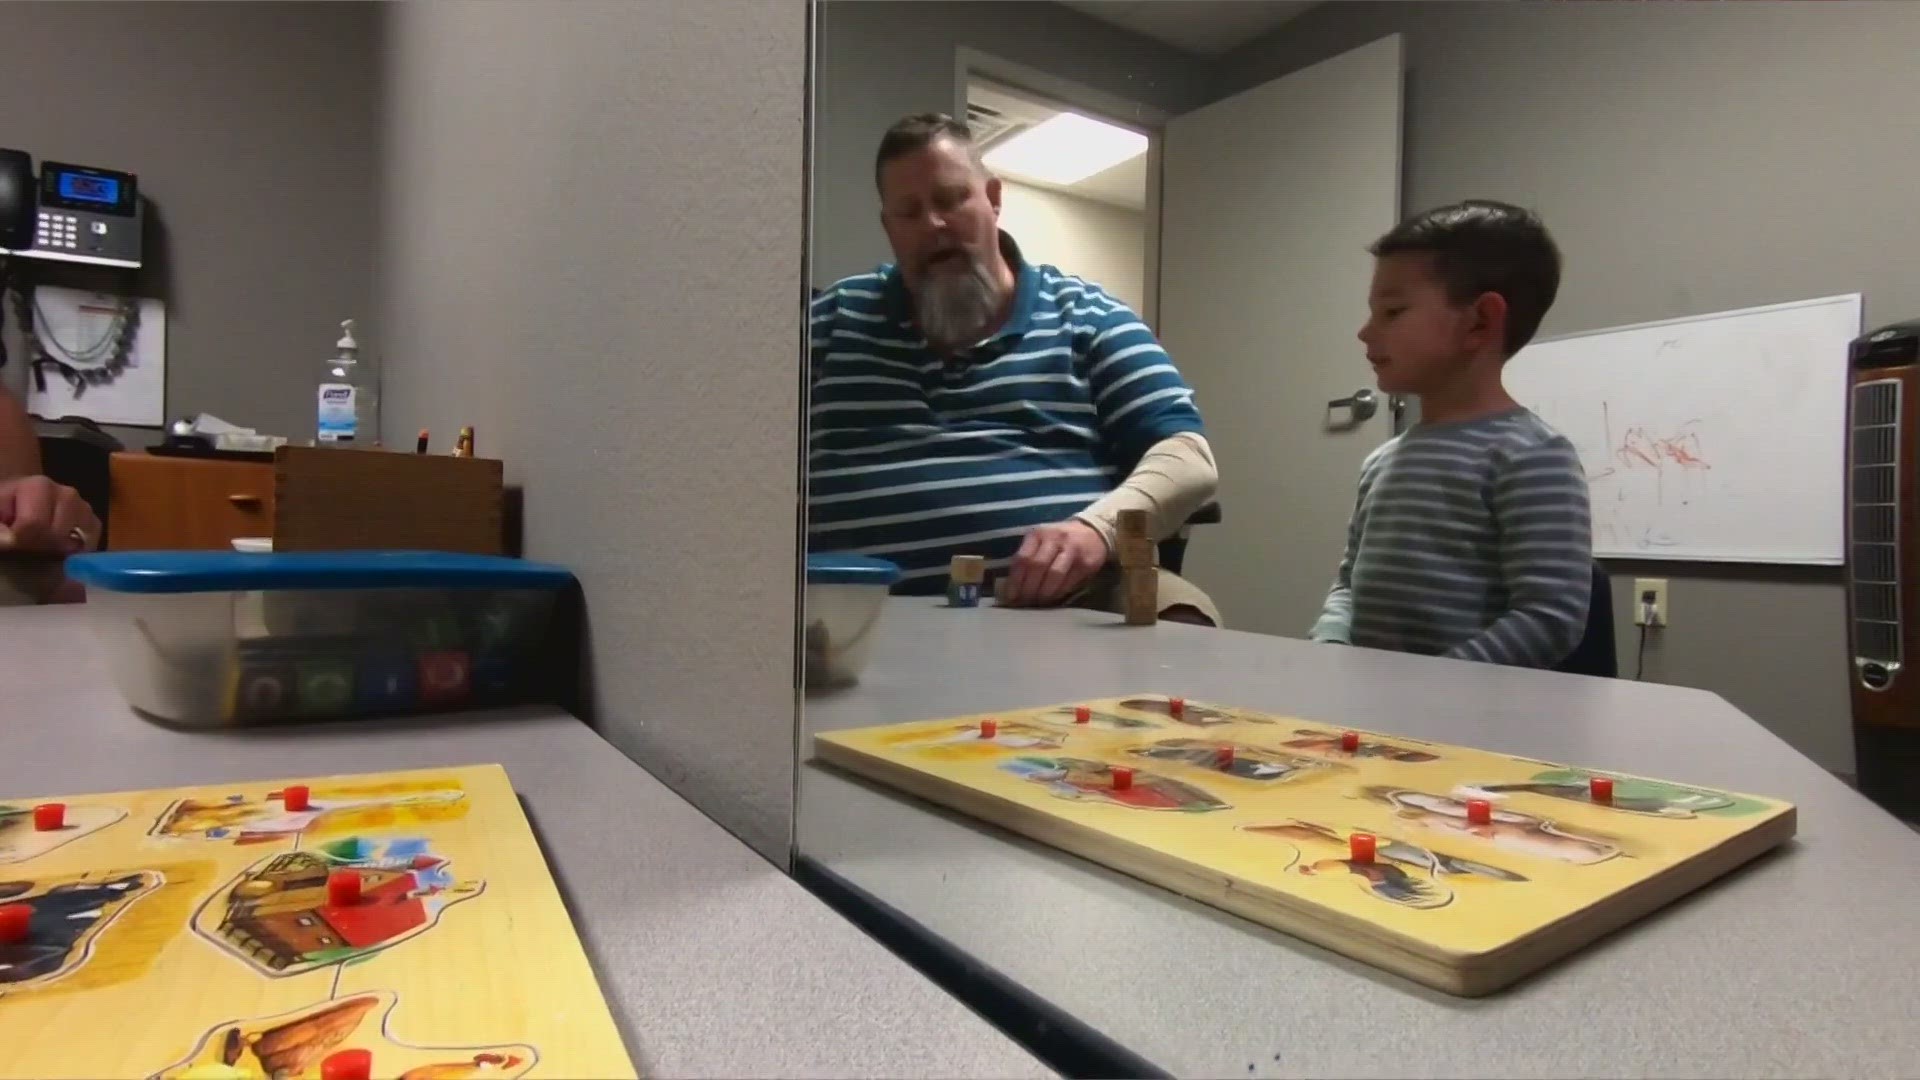 Stone, who is autistic, is finding his voice and learning visual and motor skills thanks to his therapists at the Permian Basin Rehab Center.